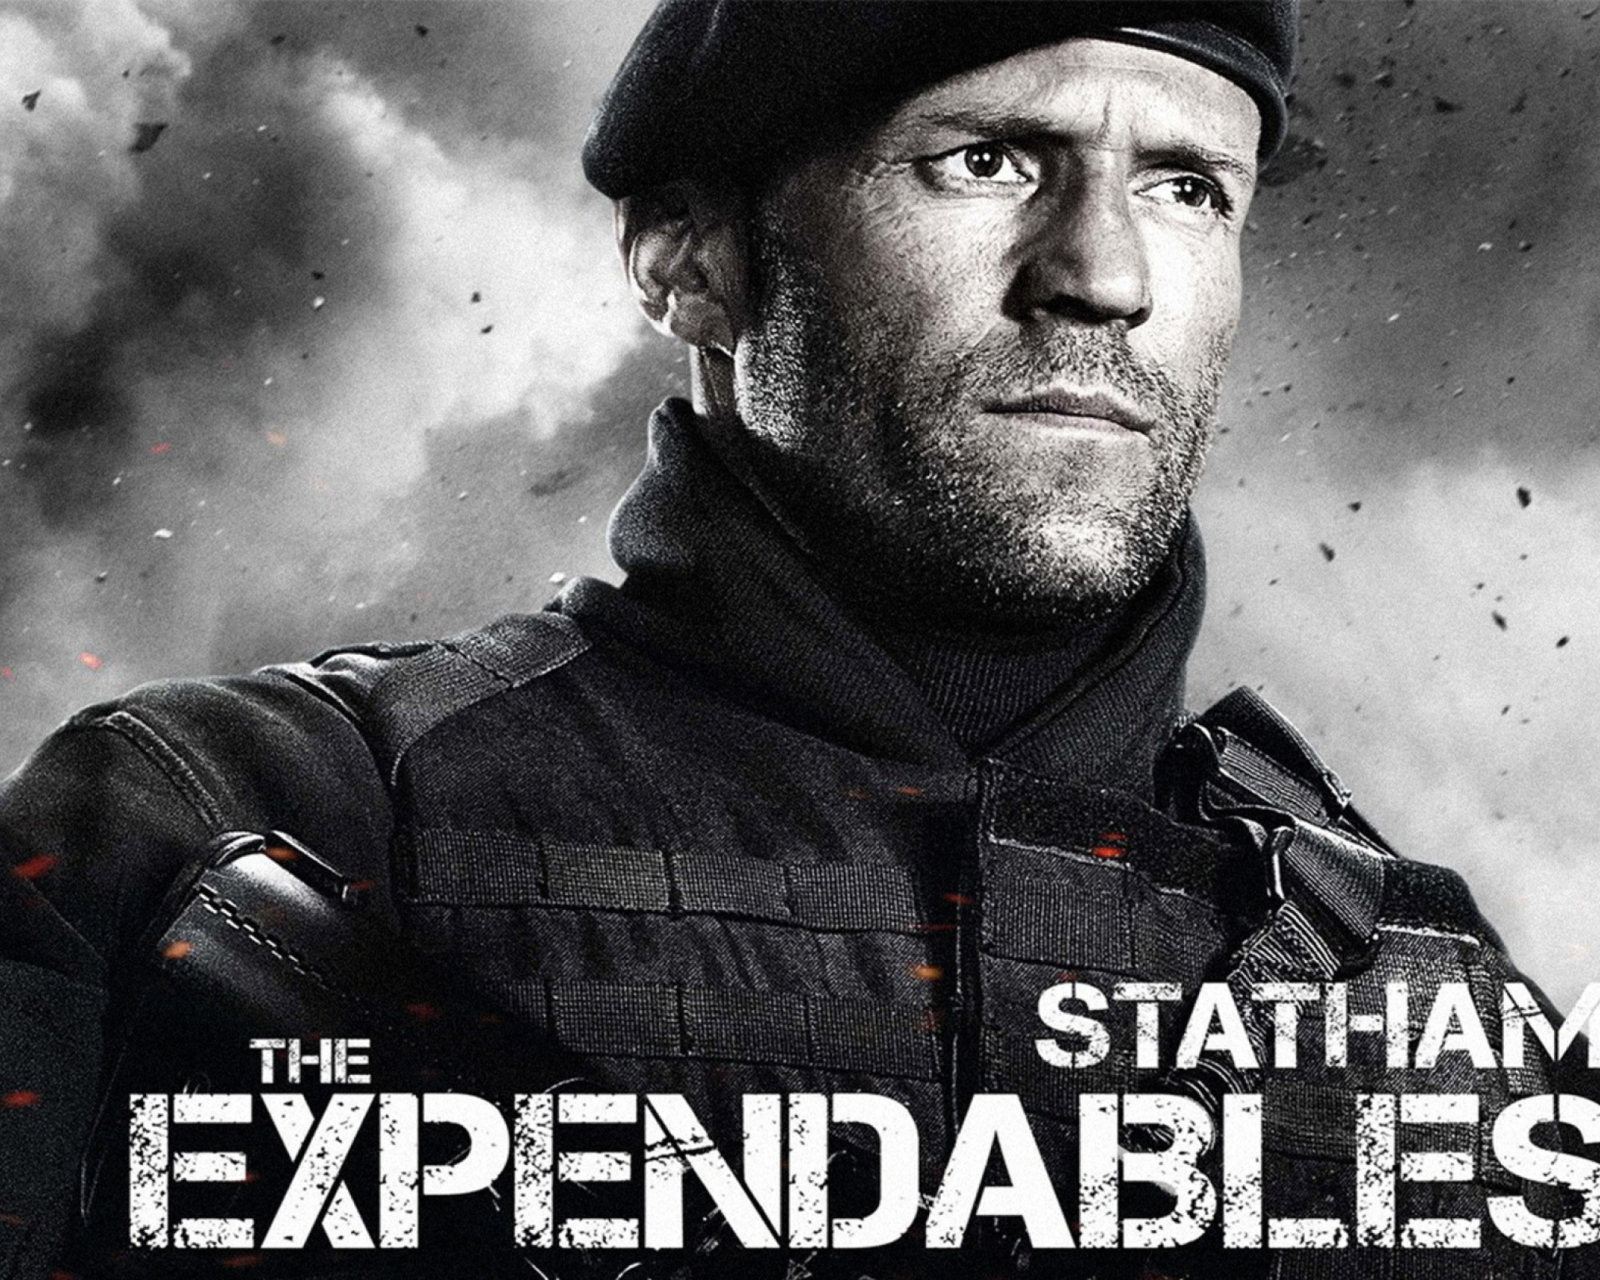 The Expendables 2 - Jason Statham wallpaper 1600x1280